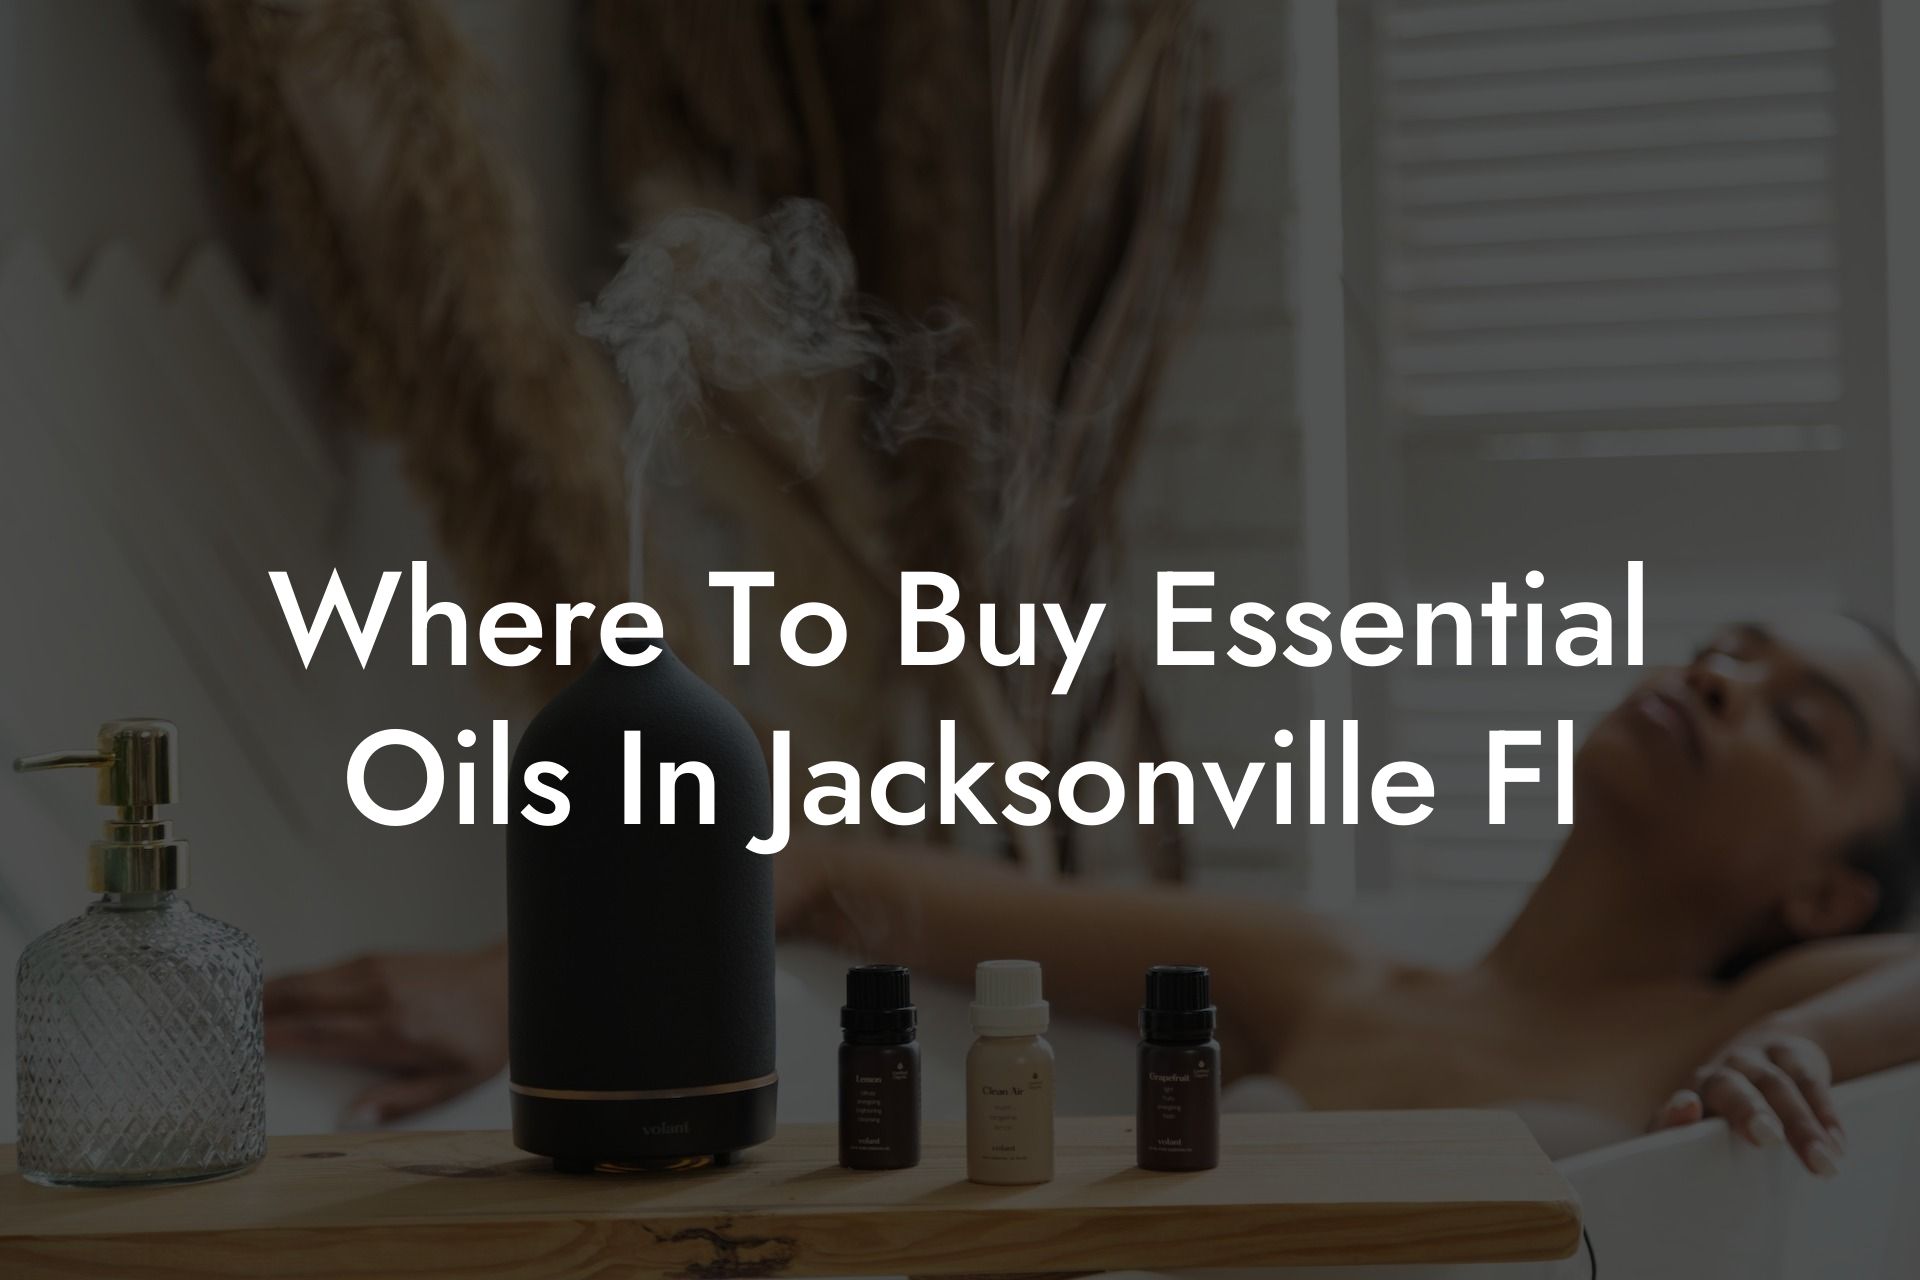 Where To Buy Essential Oils In Jacksonville Fl